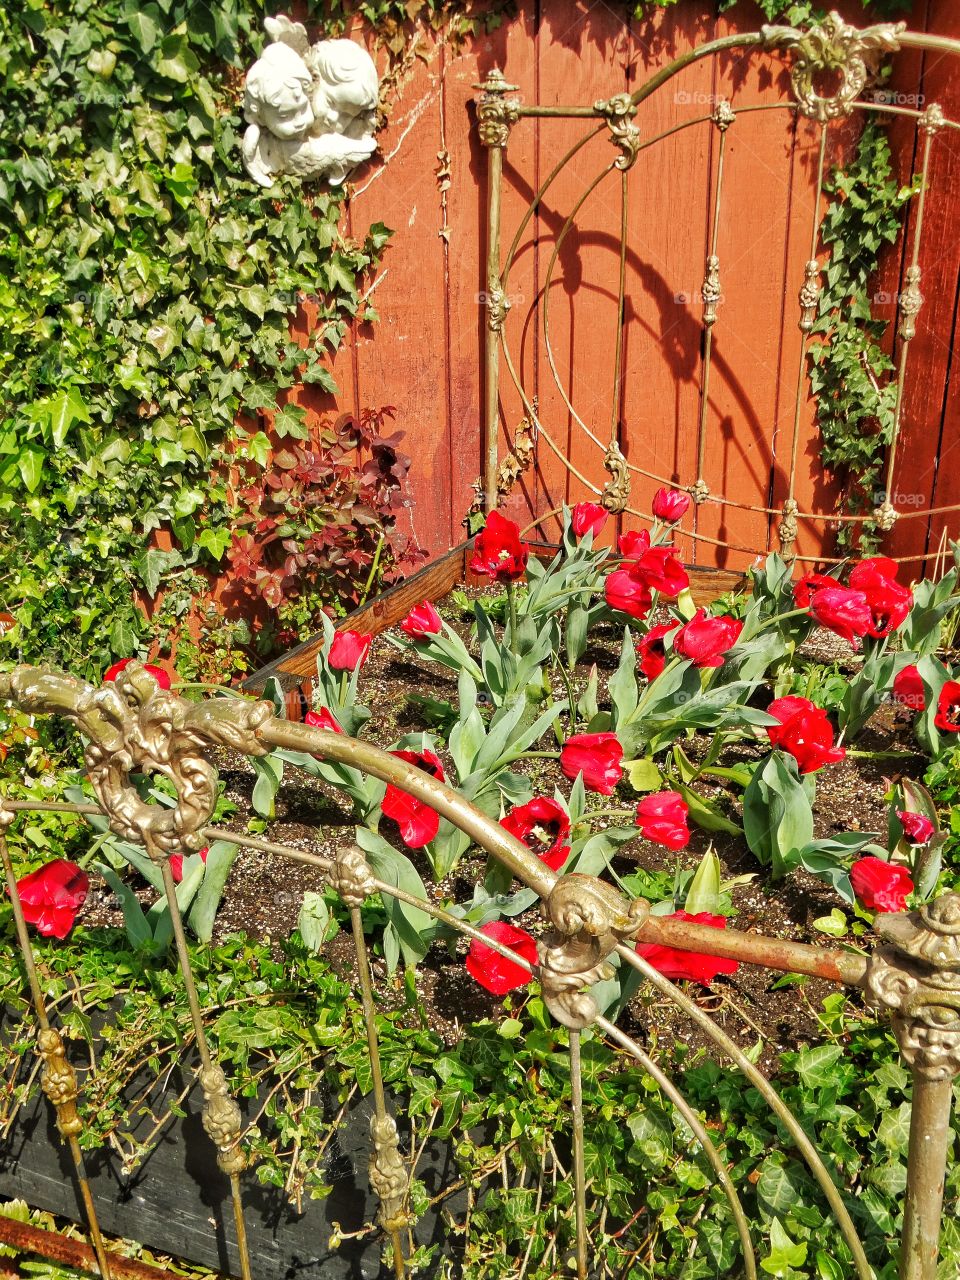 Red Tulips Planted In An Antique Bed Frame
